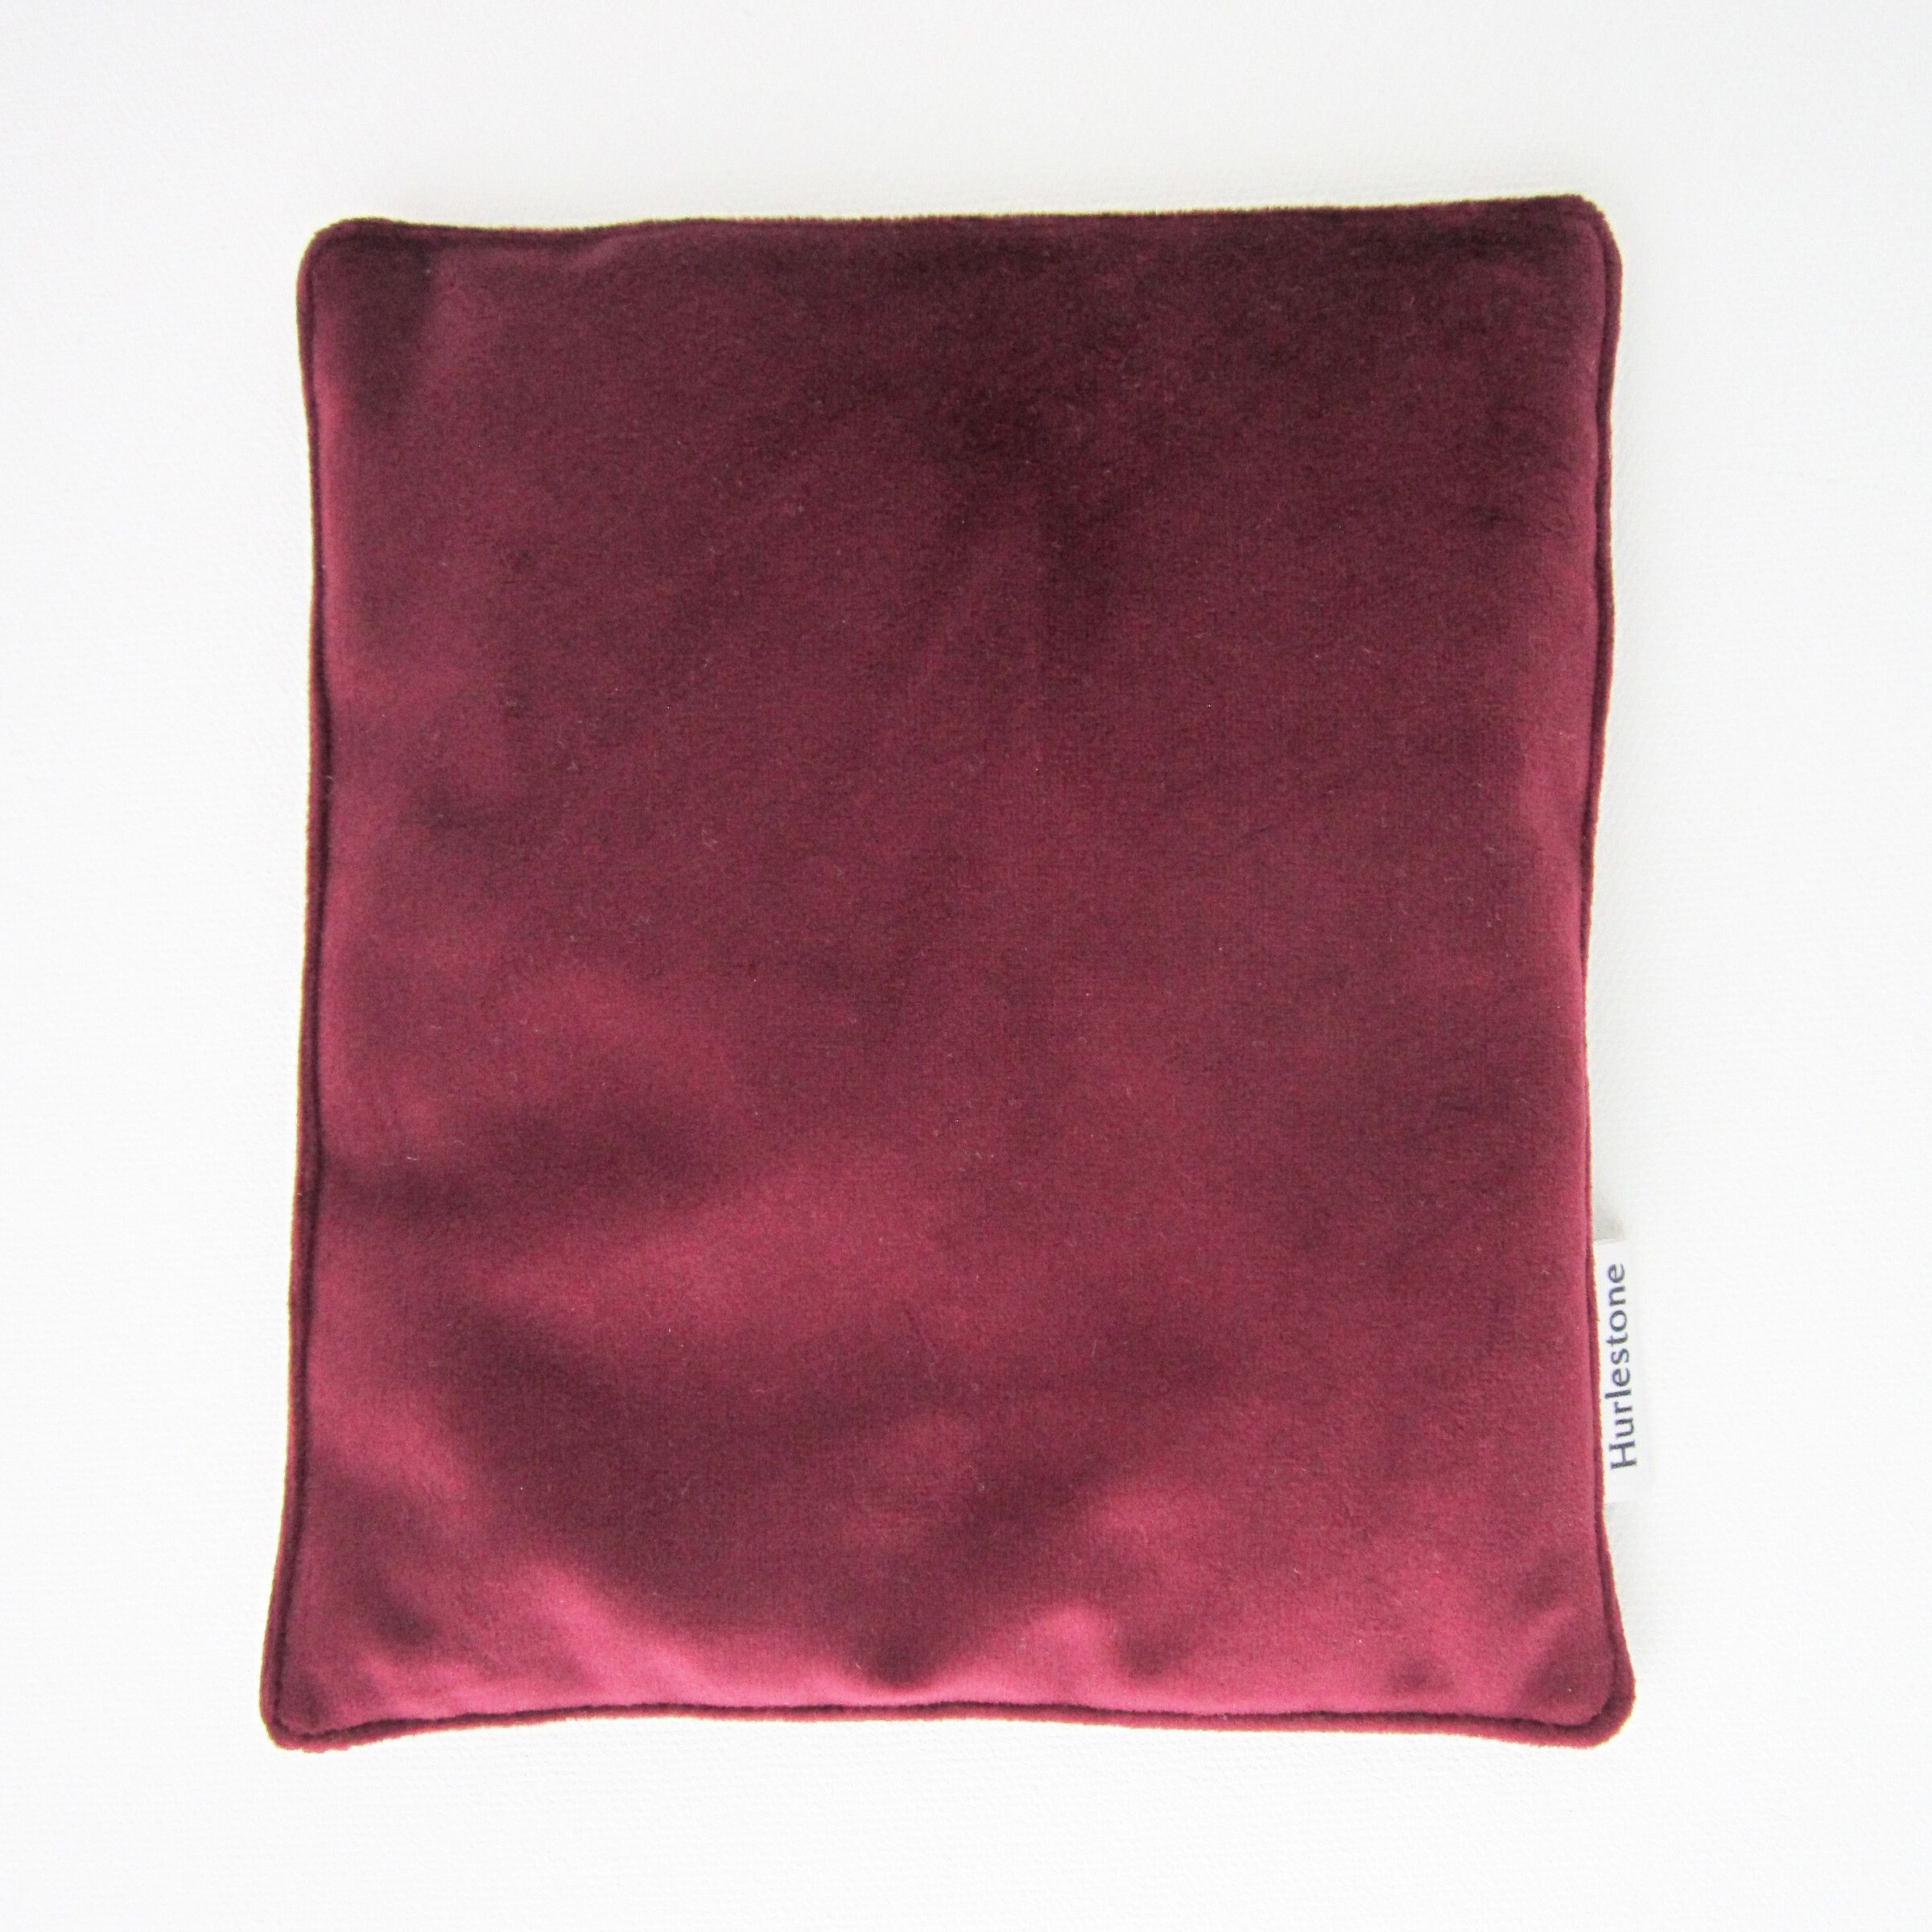 Cabernet Pen Pillow - Small/Large from NZ$16.00